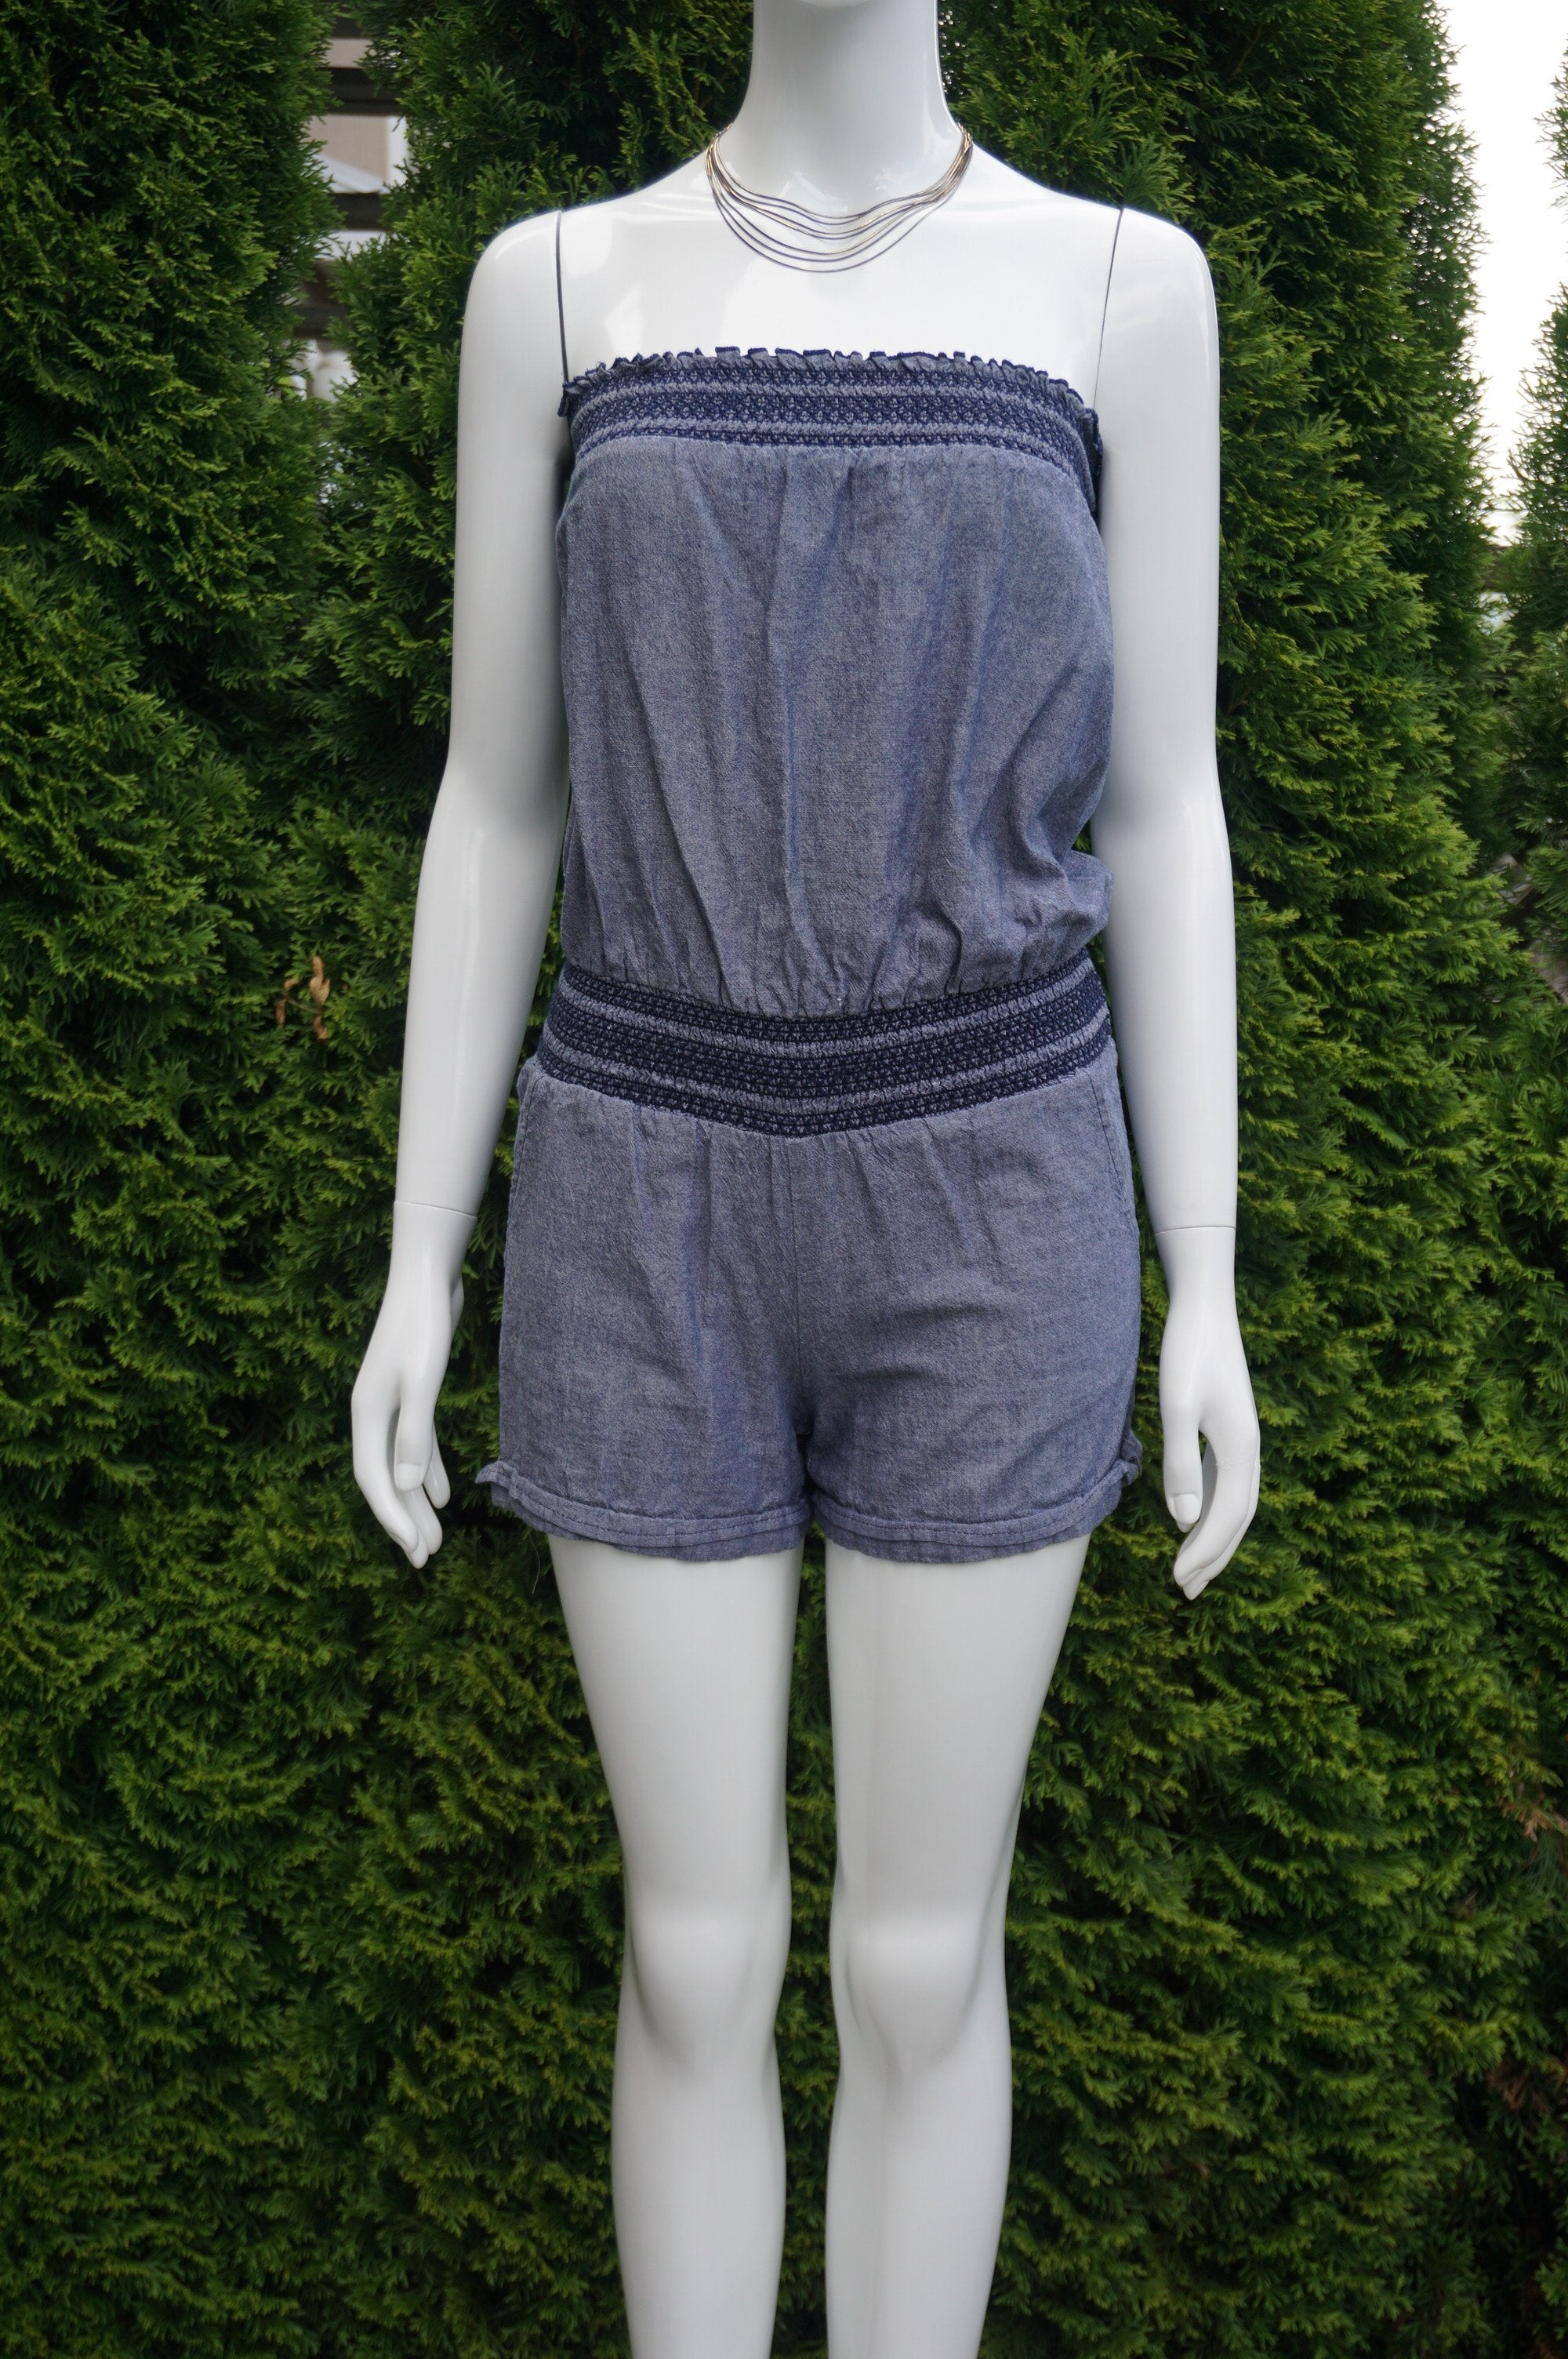 Honolua Wahine Strapless Elastic Tube Romper , Cute, sexy, and comfy - this jumpsuit is the whole package. Elastic top measures 24 inches, breast measures 36 inches, length 23 inches measured from top of breast. , Blue, women's Dresses & Rompers, women's Blue Dresses & Rompers, Honolua Wahine women's Dresses & Rompers, Jumpsuit, Romper,Spaghetti banded strap romper, banded tube romper, banded strapless jumpsuit